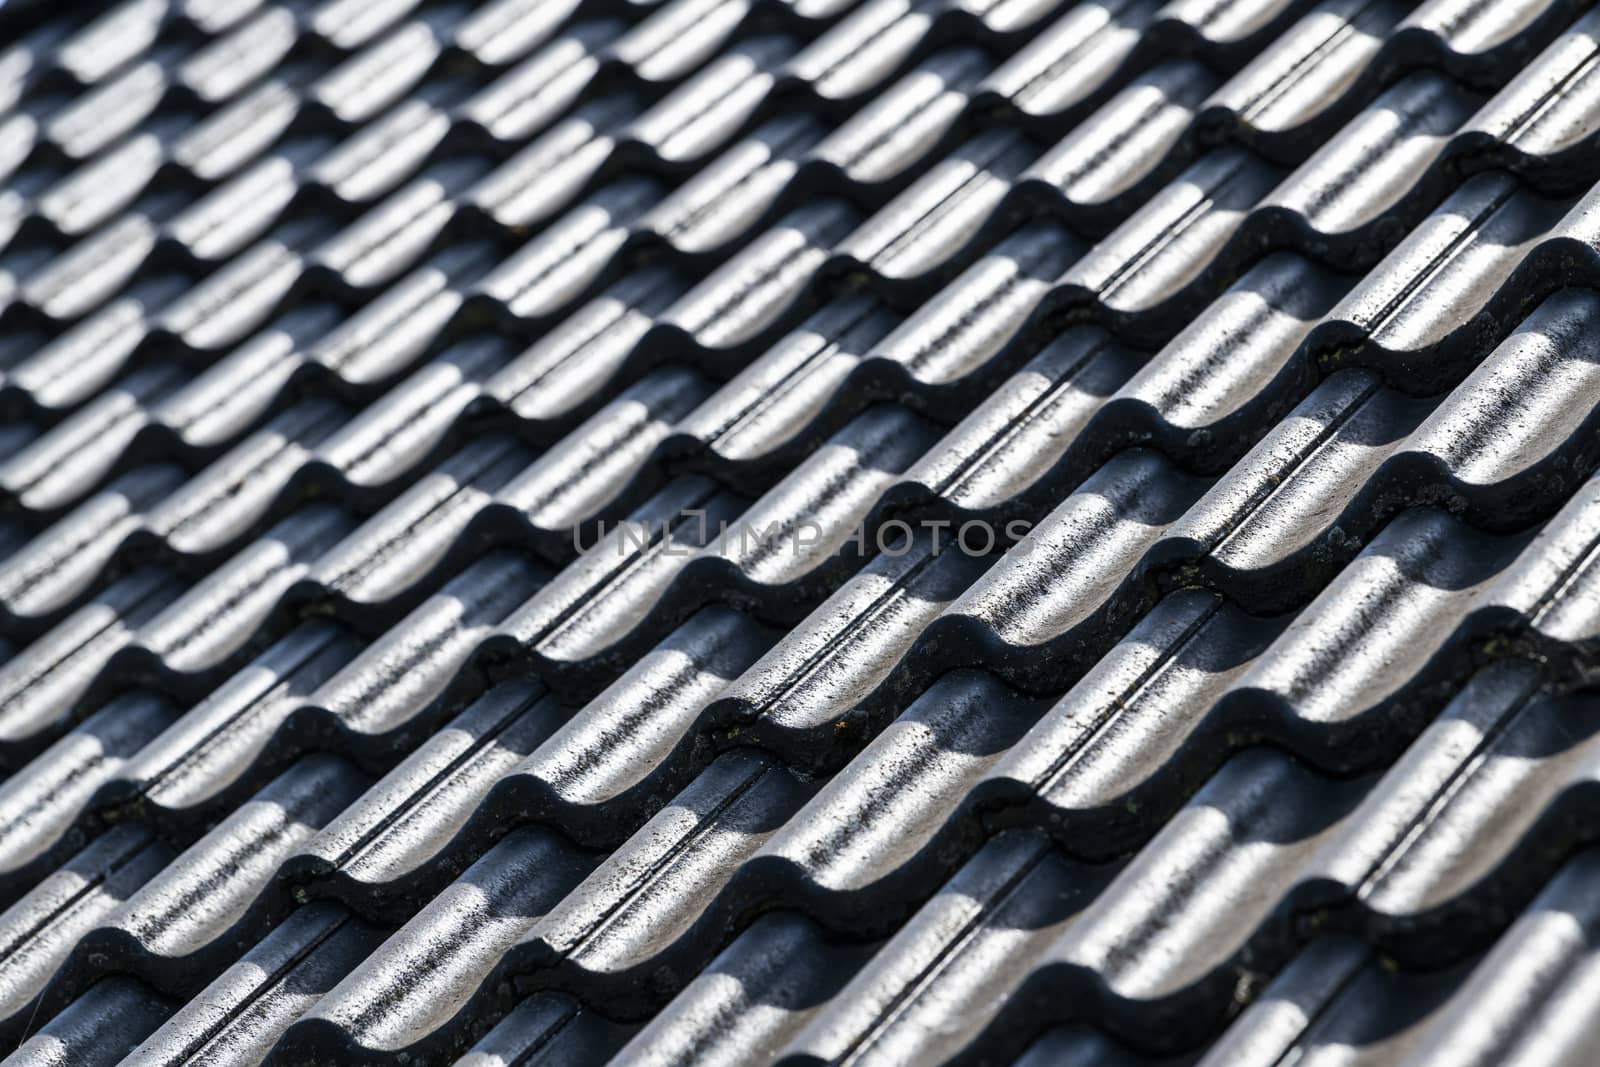 Abstract inclined roof surface with black concrete tiles in a high contrast as a background picture
